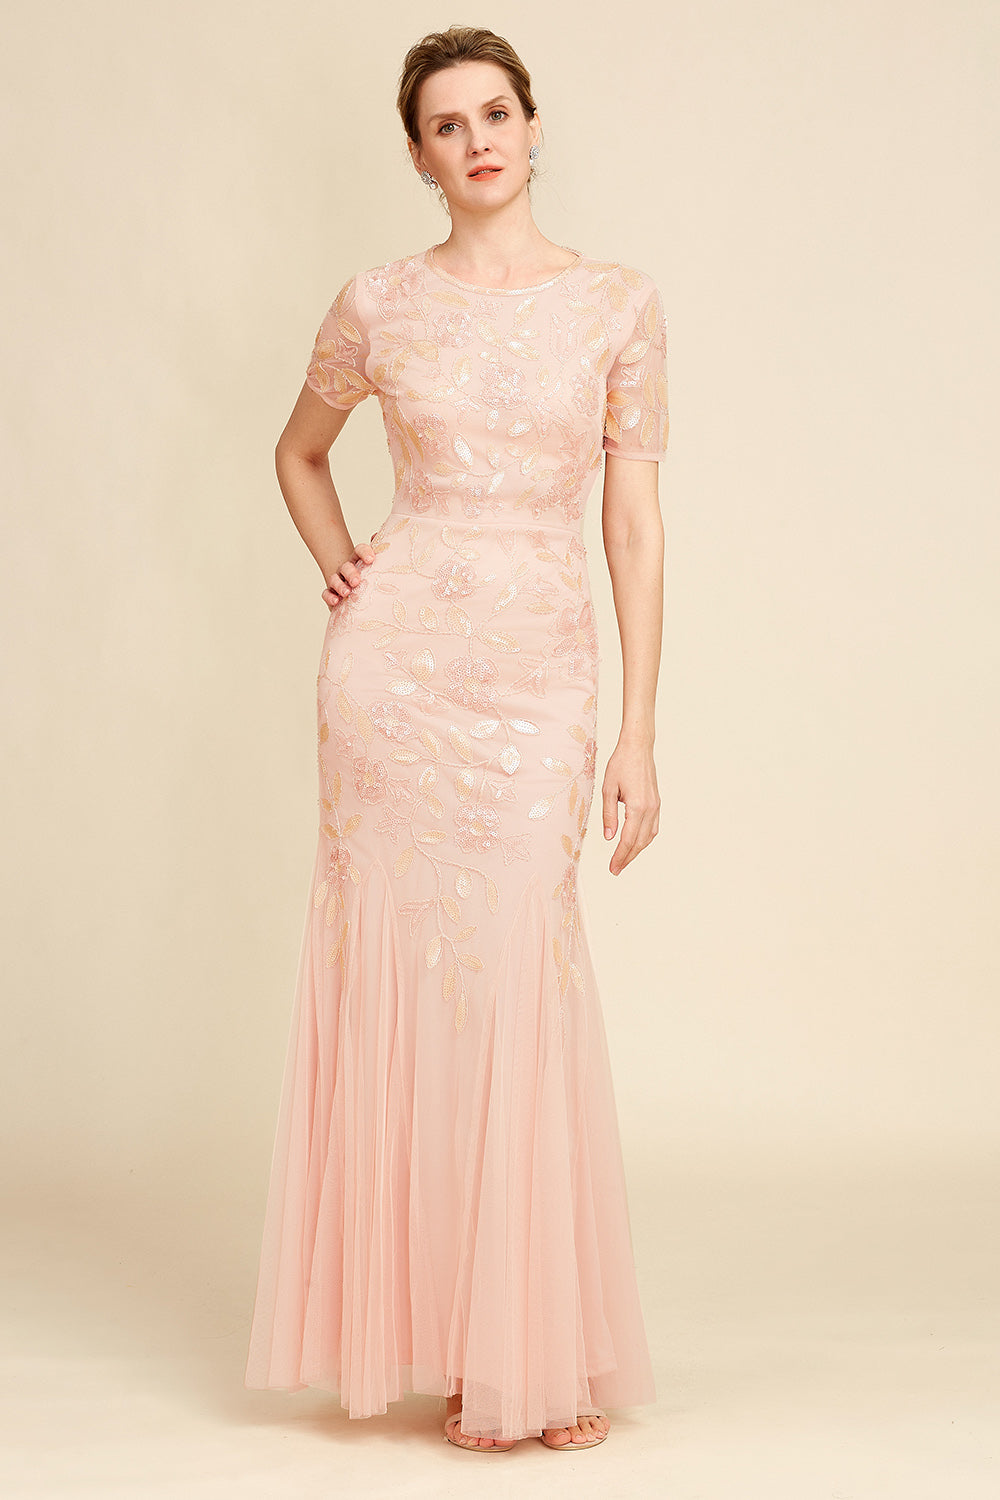 Blush Short Sleeves Sheath Mother Of The Bride Dress